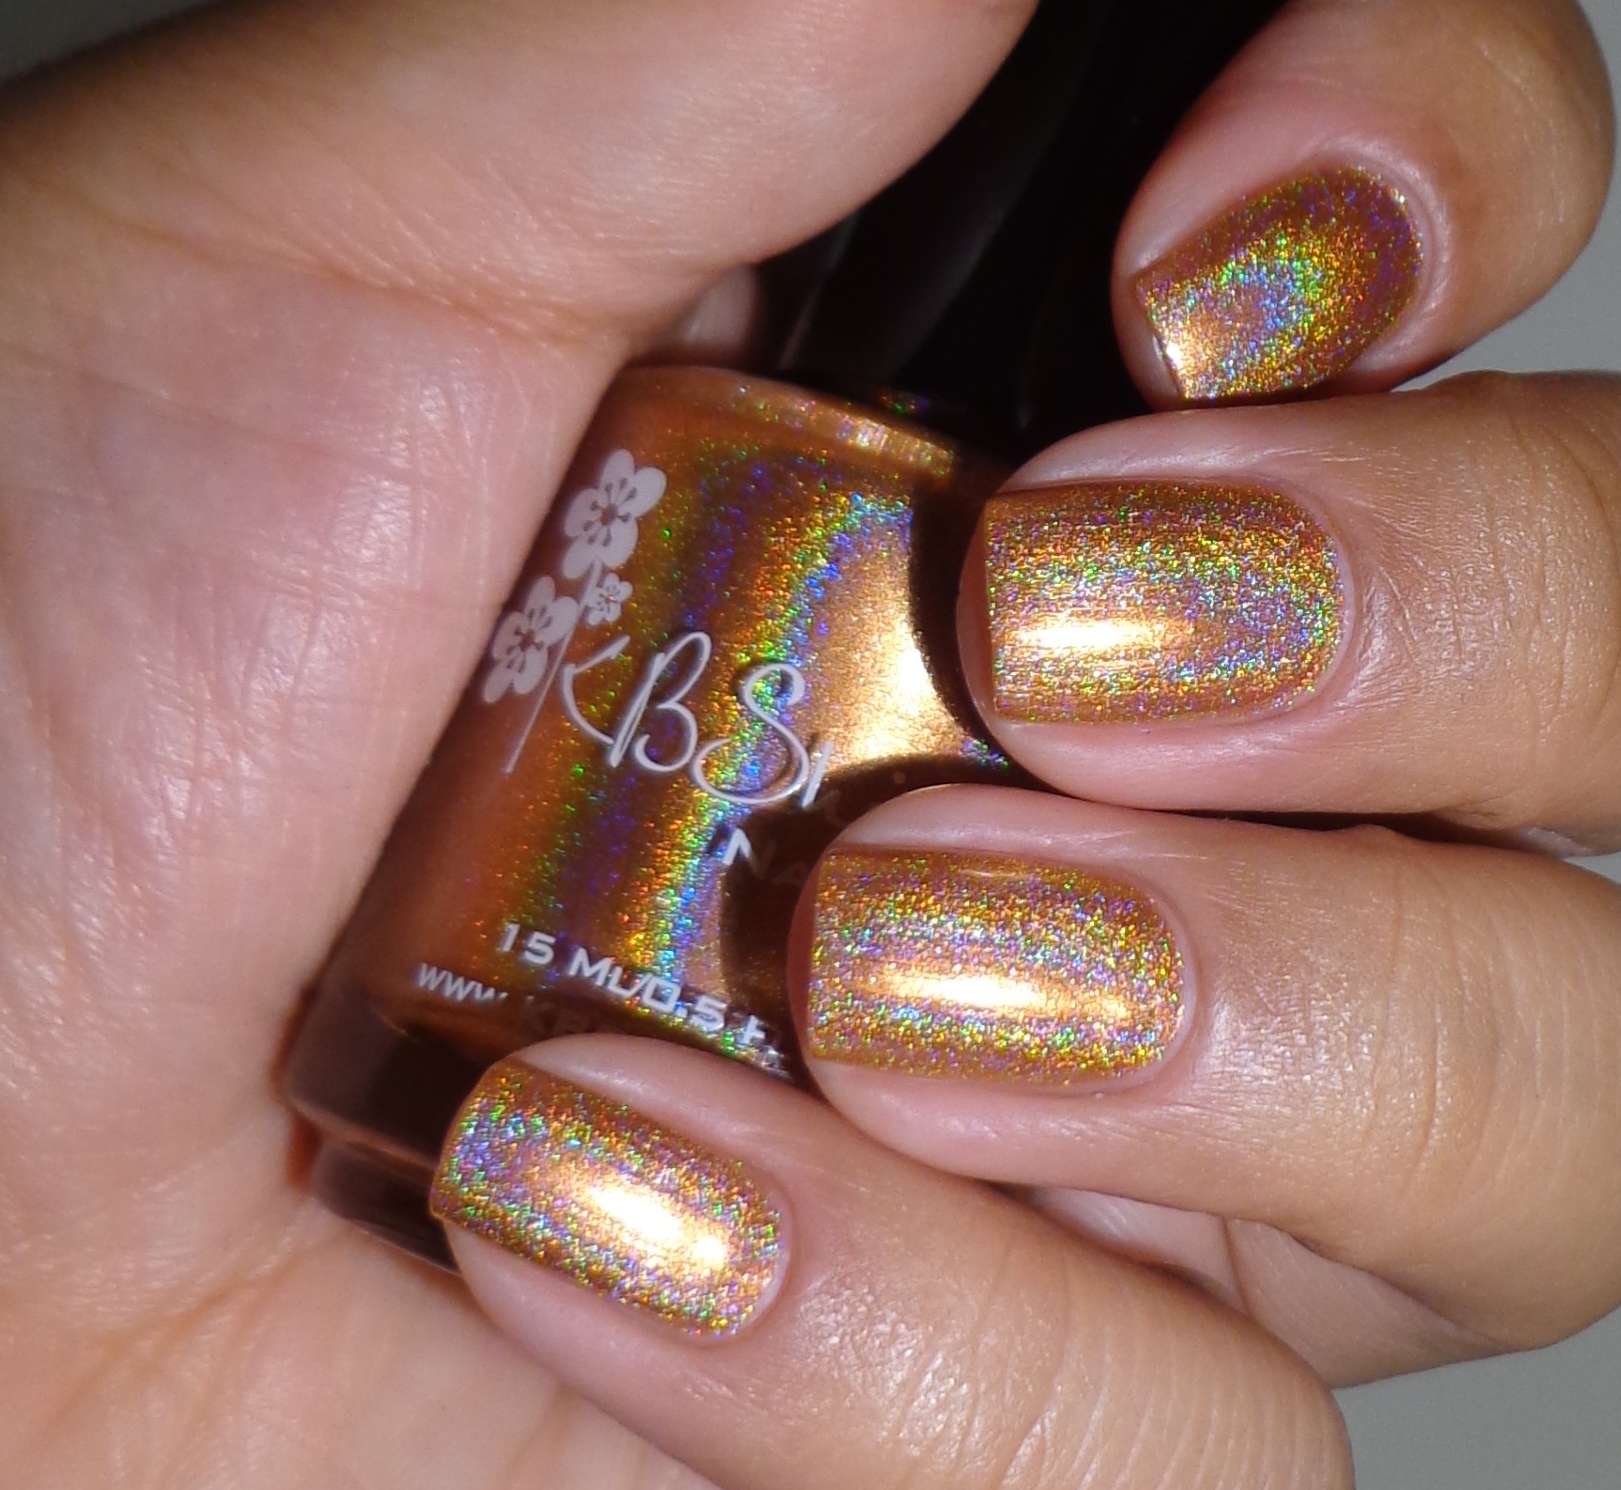 KBShimmer Run! It's The Coppers! 4